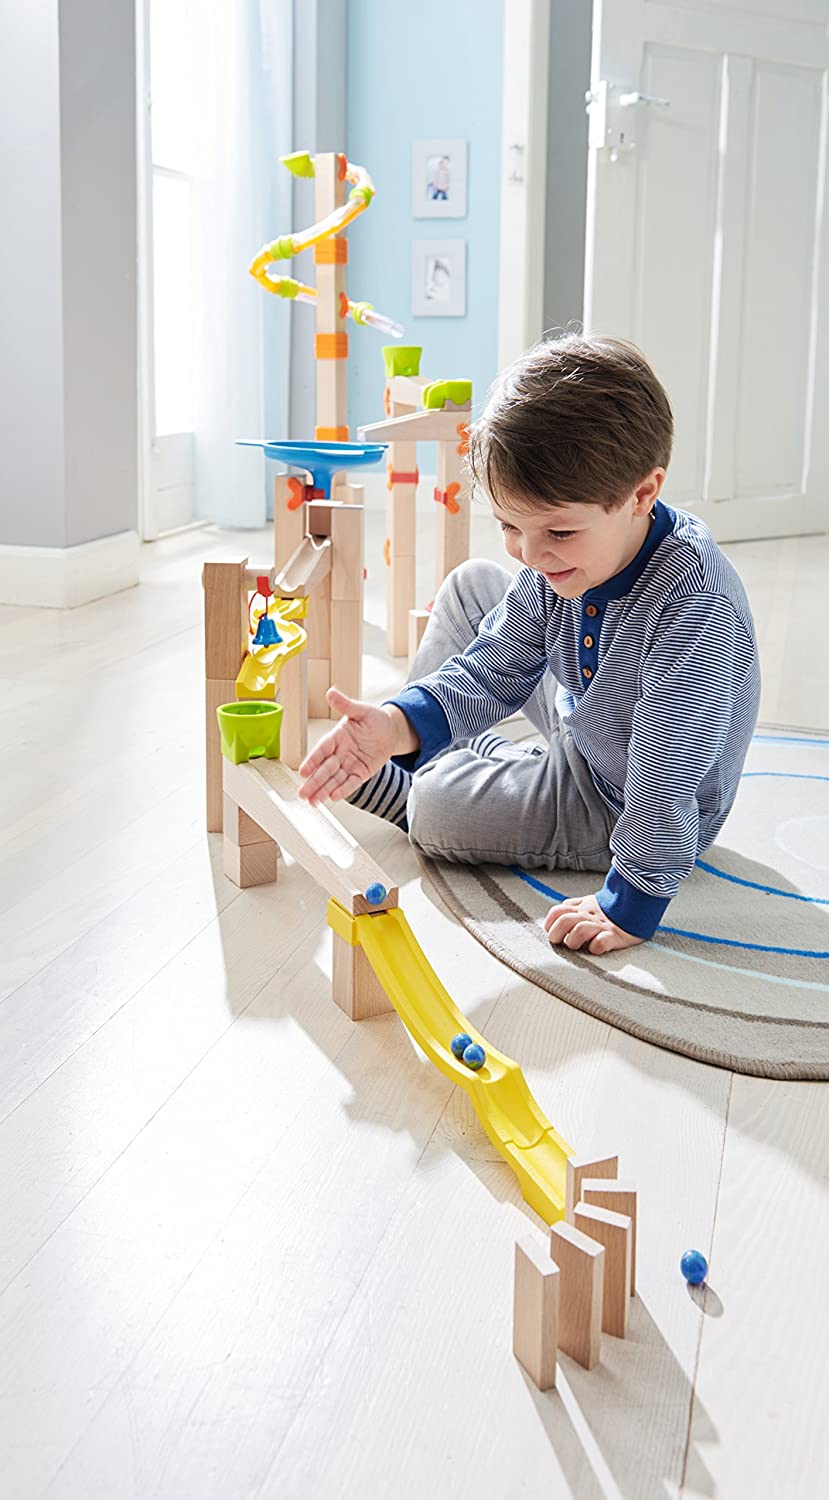 science learning with HABA ball track set - HABA wooden playsets - The Toy Room